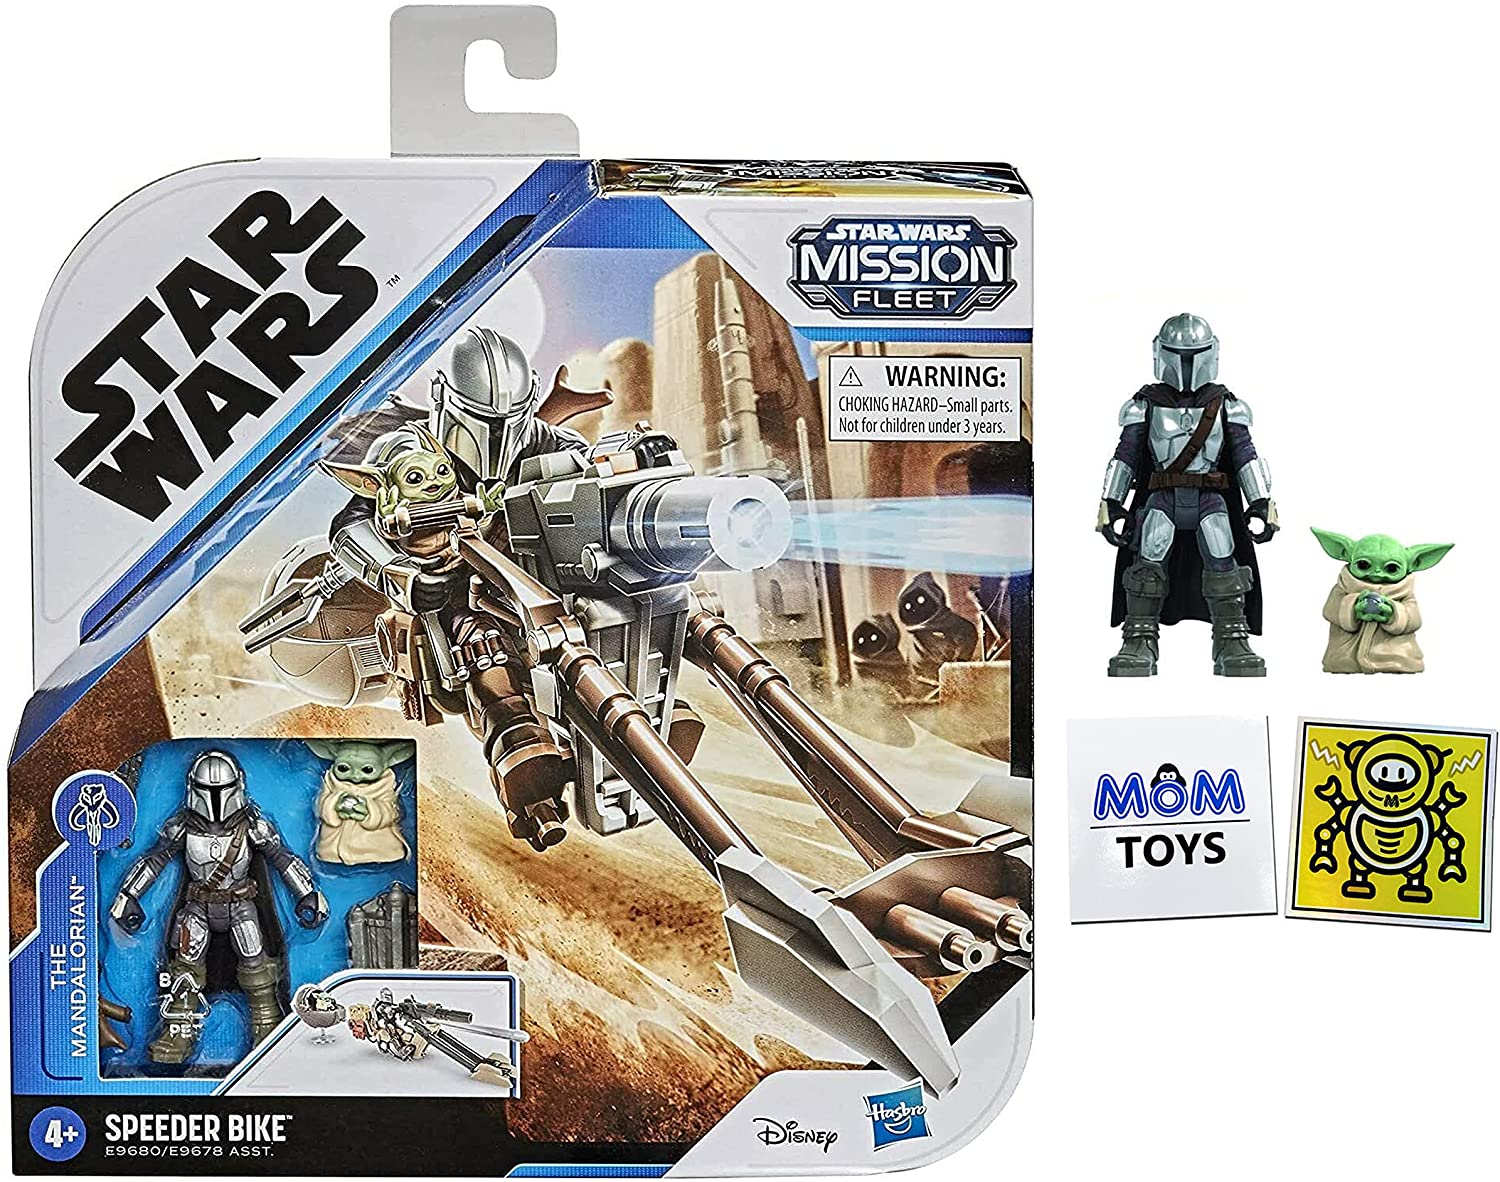 Star Wars Mission Fleet The Mandalorian and The Child Speeder Bike and 2 x 2.5 inch Action Figures Plus 2 My Outlet Mall Stickers